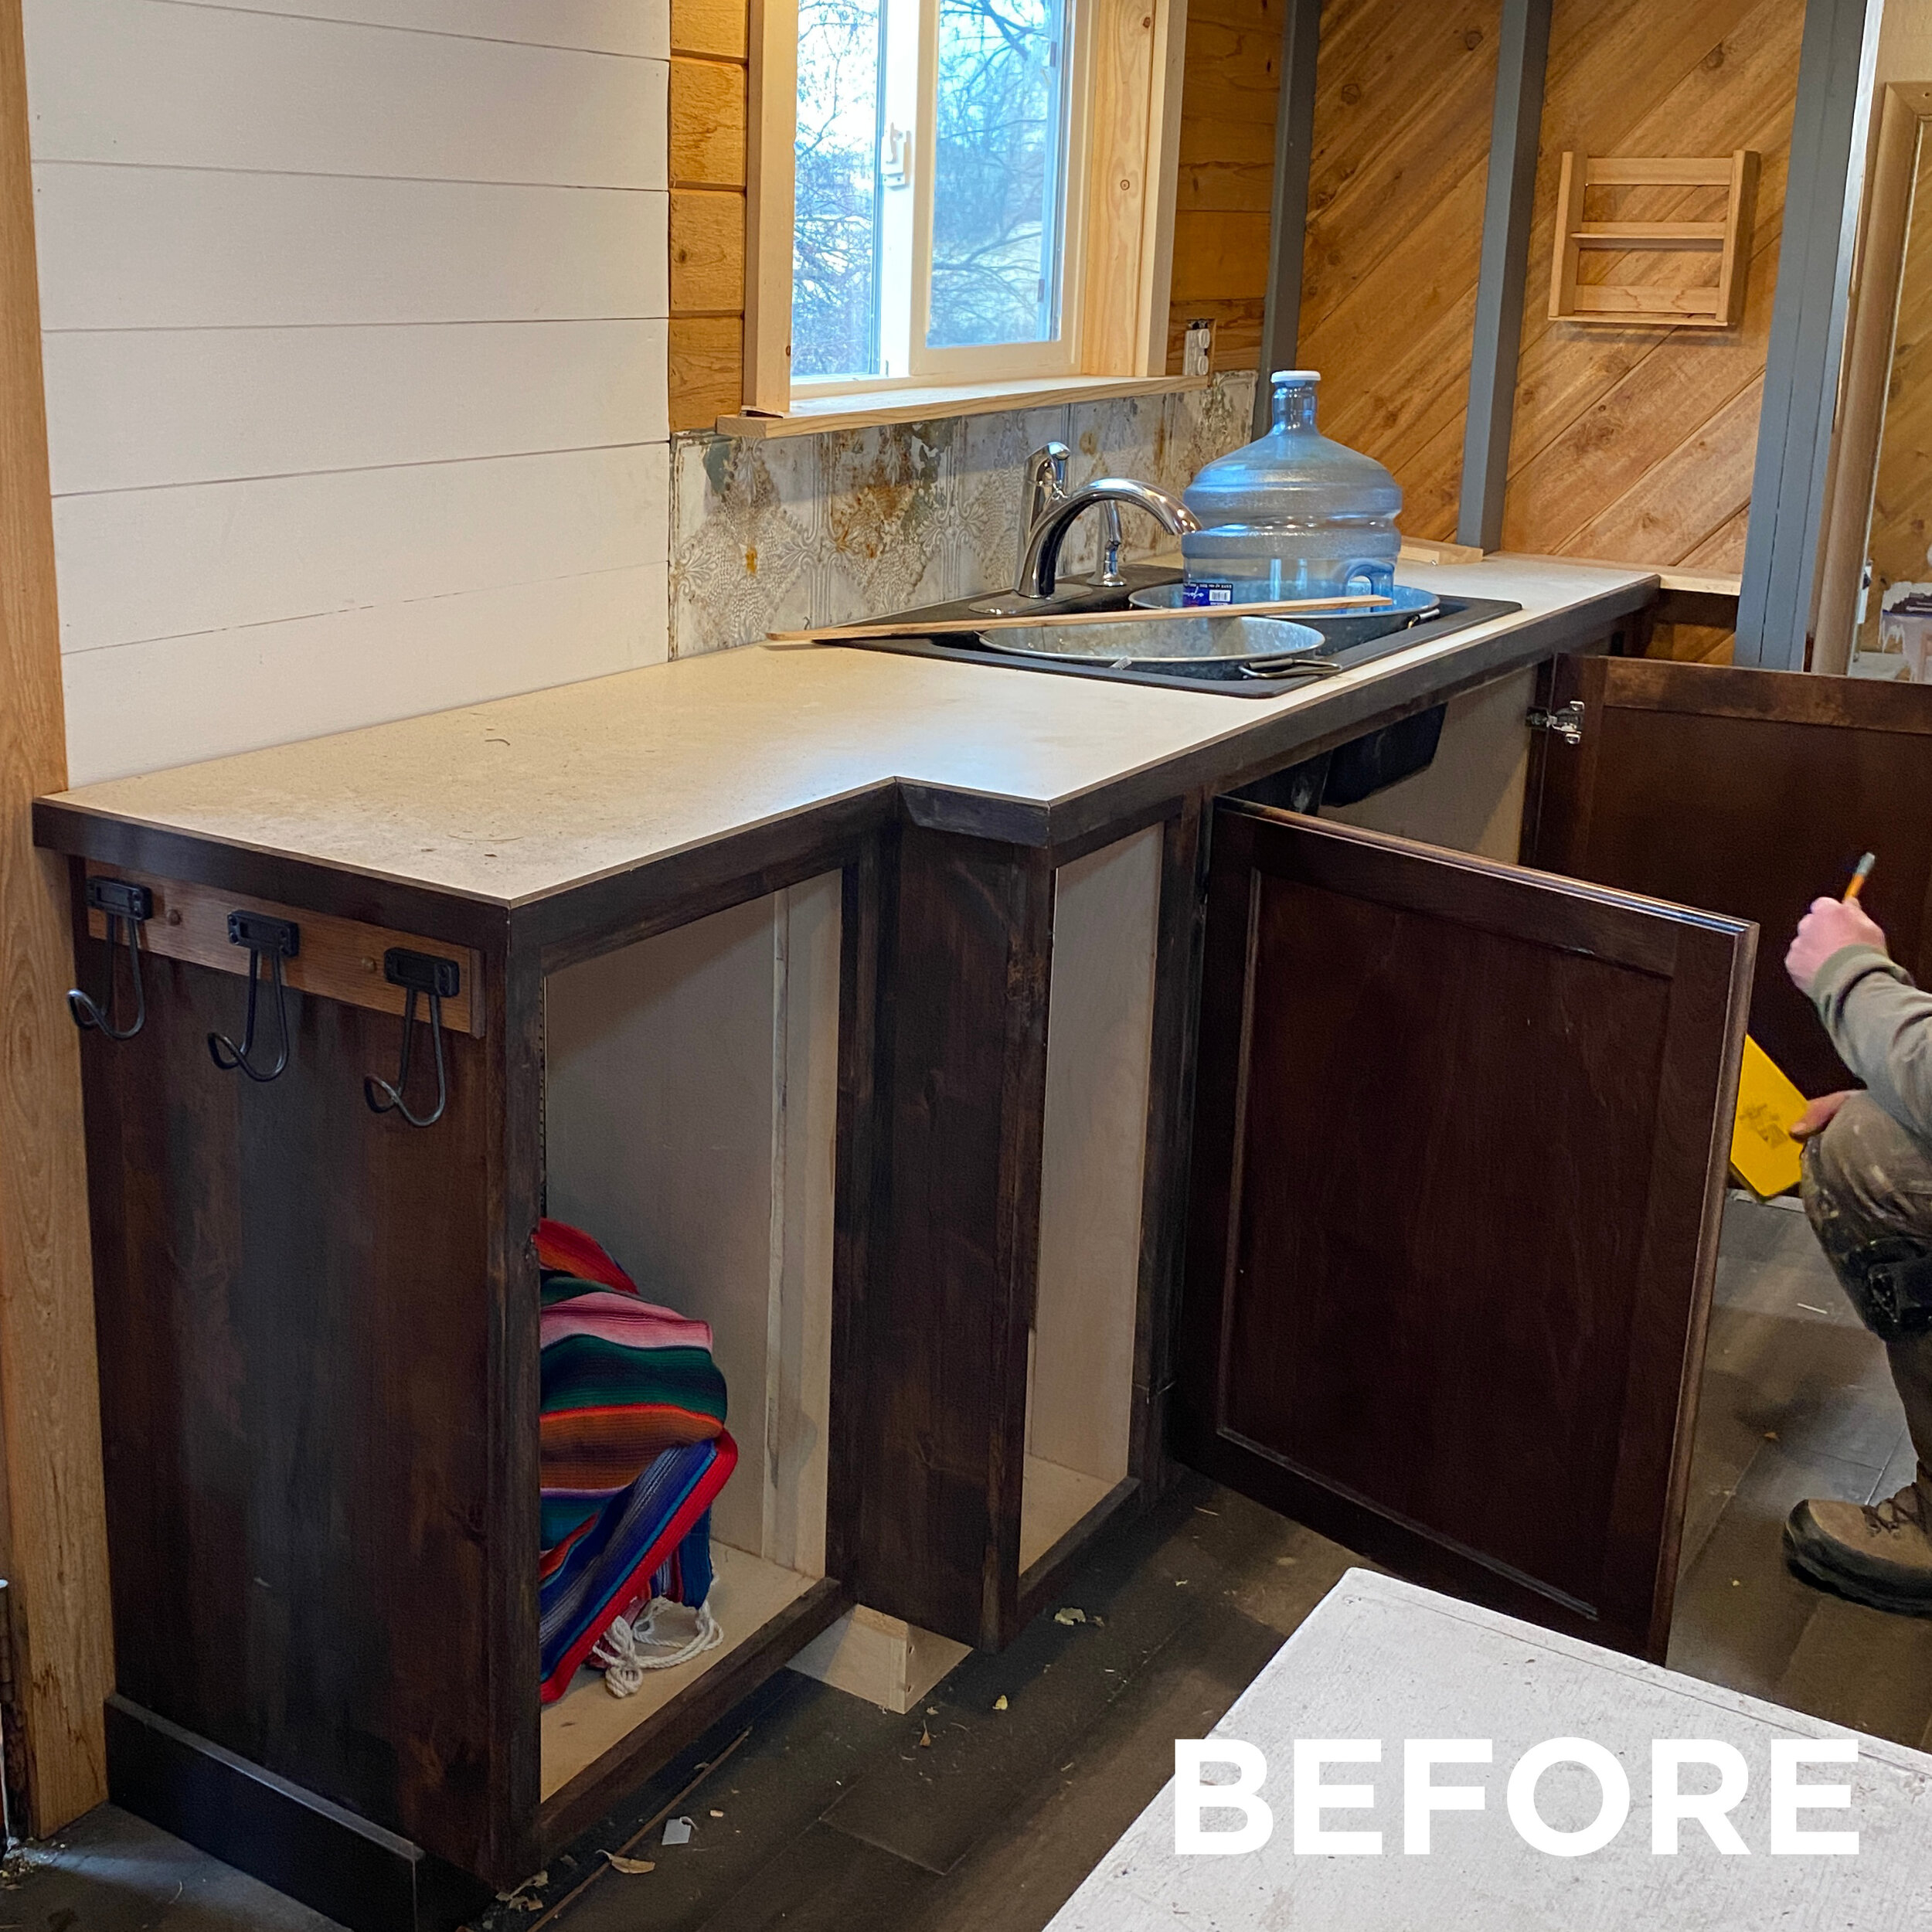 BEFORE & AFTER MARY TINY HOUSE7.jpg